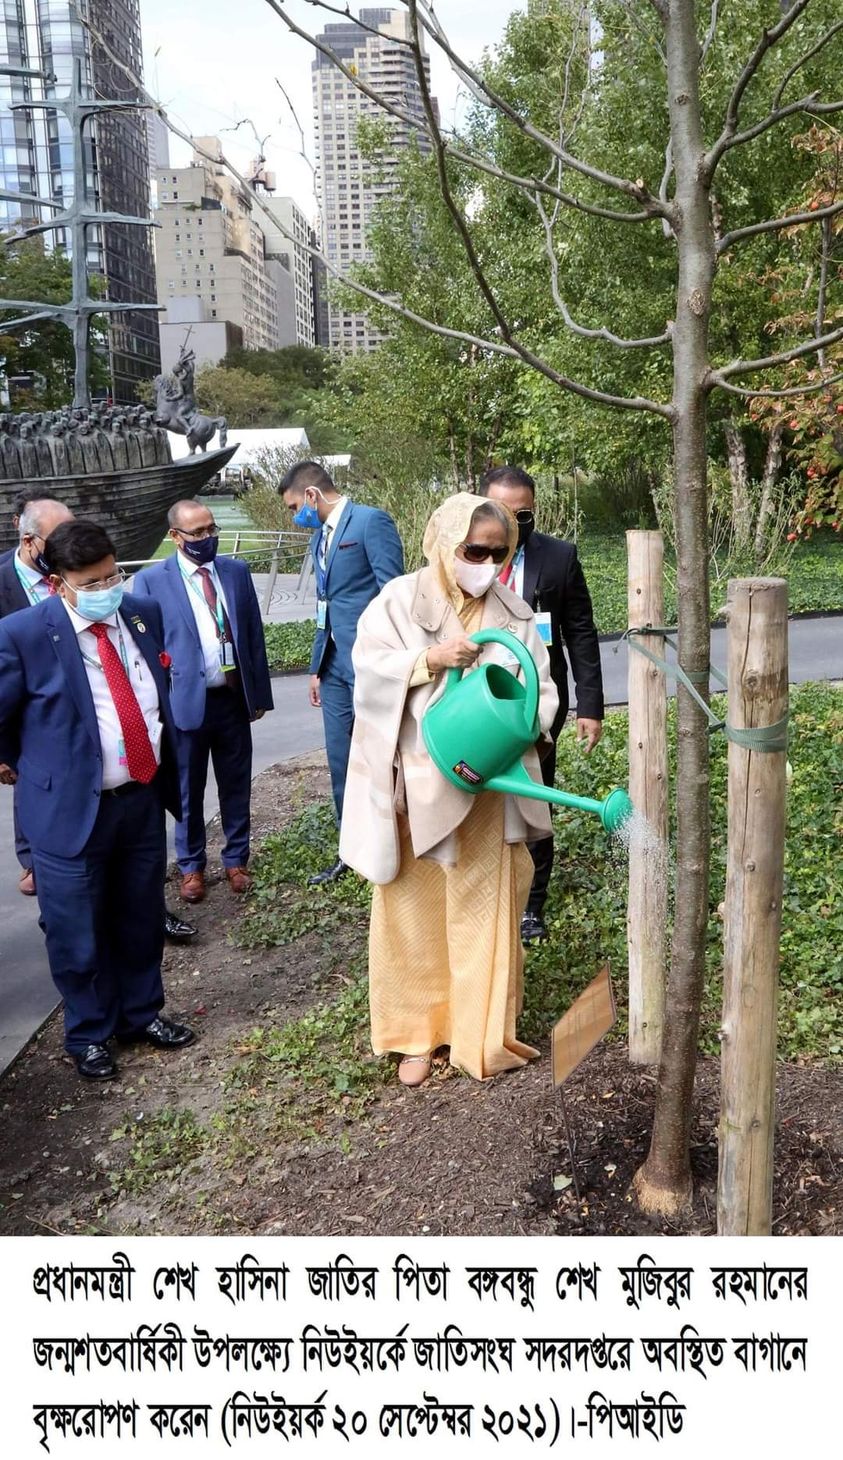 Glimpses of Sheikh Hasina's busy day in US